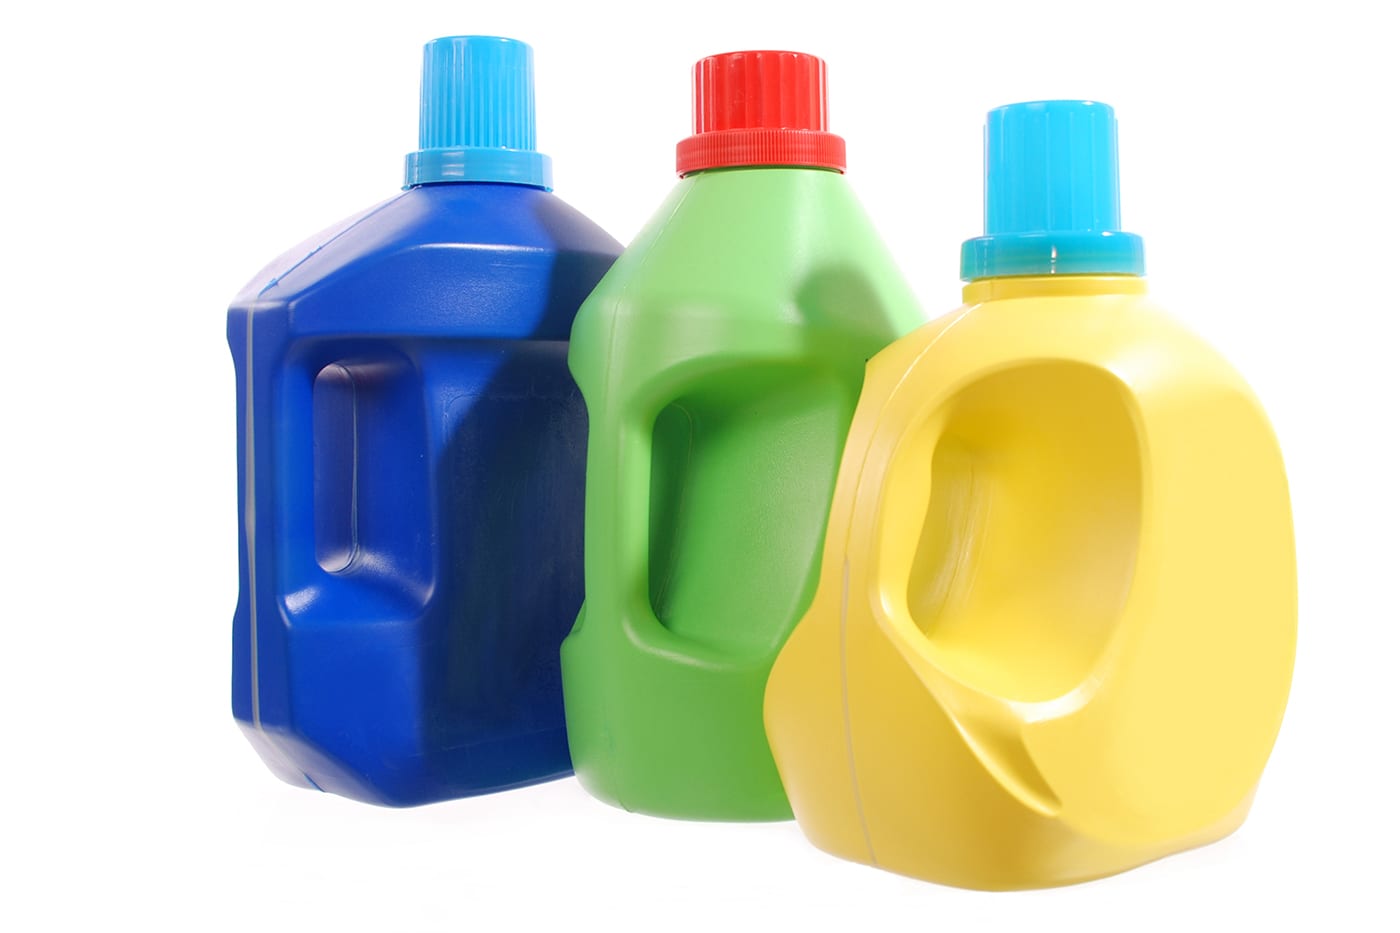 How To Dispose Of Cleaning Products & Laundry Supplies